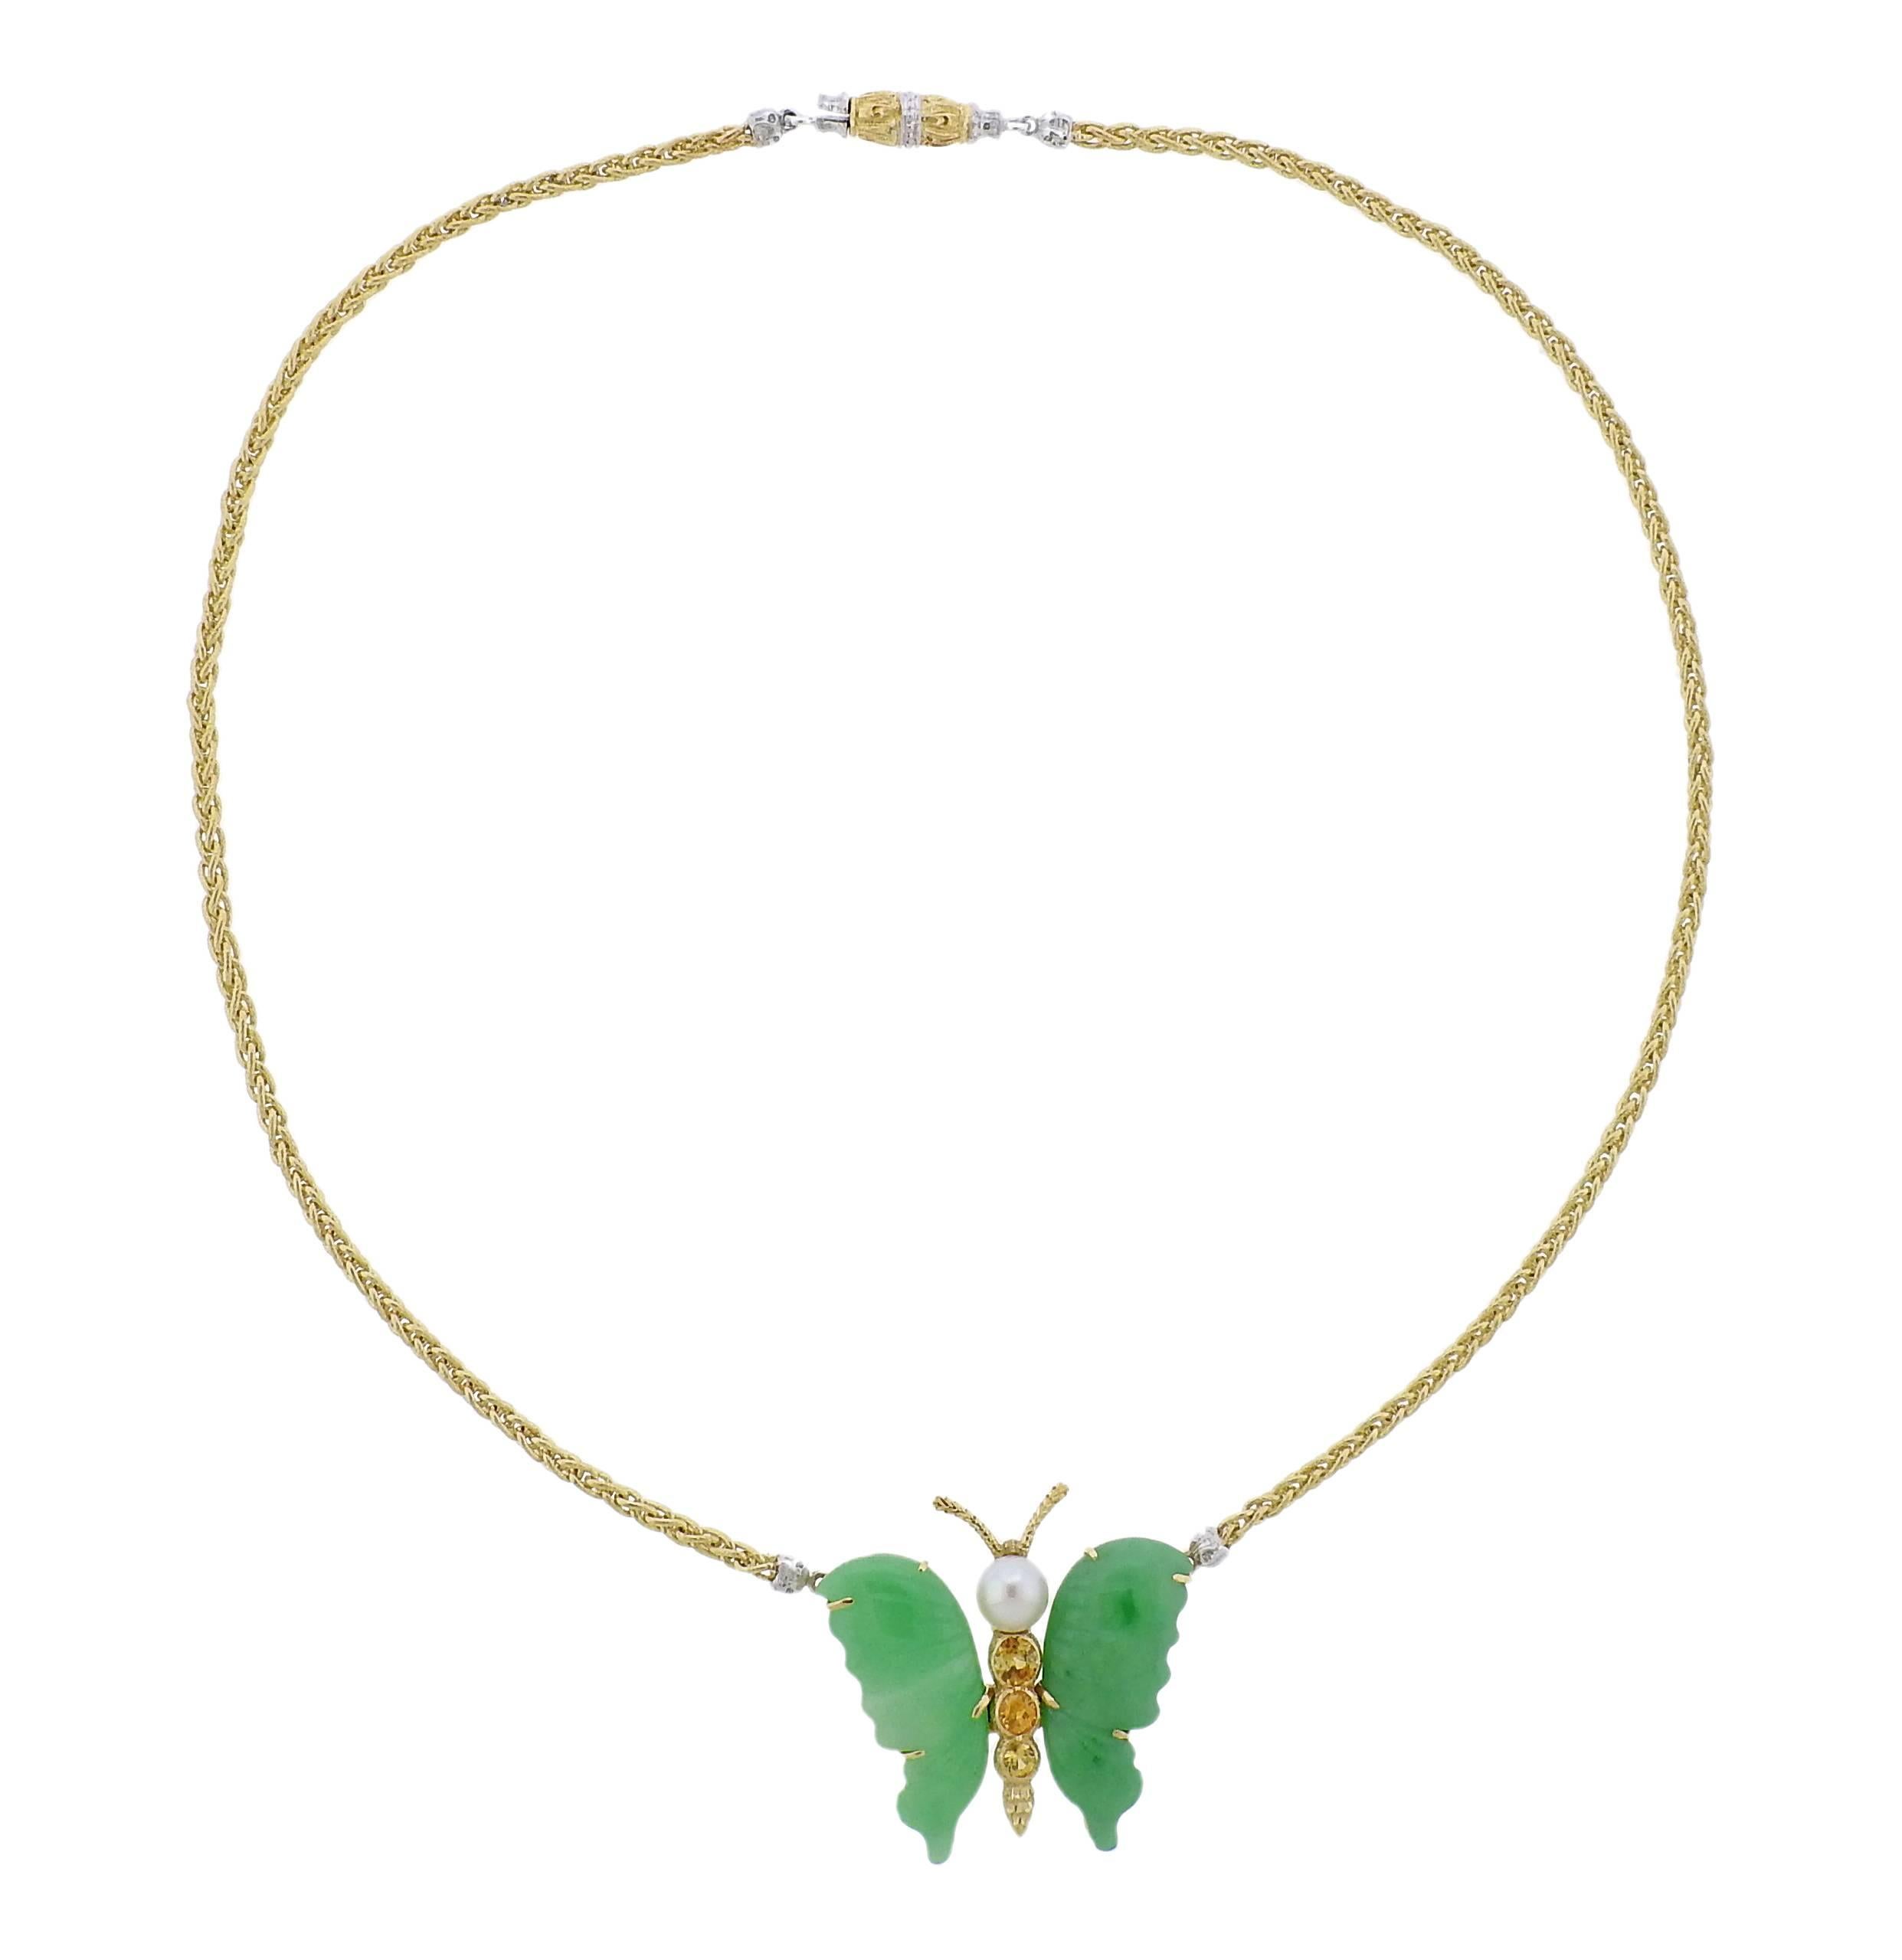 An 18k gold necklace, crafted by Buccellati, featuring butterfly pendant, adorned with carved jade wings, citrines and a pearl. Necklace is 16 inches long, pendant is 32mm x 28mm. Marked: Buccellati, Italy, 18k, S5005. Weight - 19.8 grams.
Retail